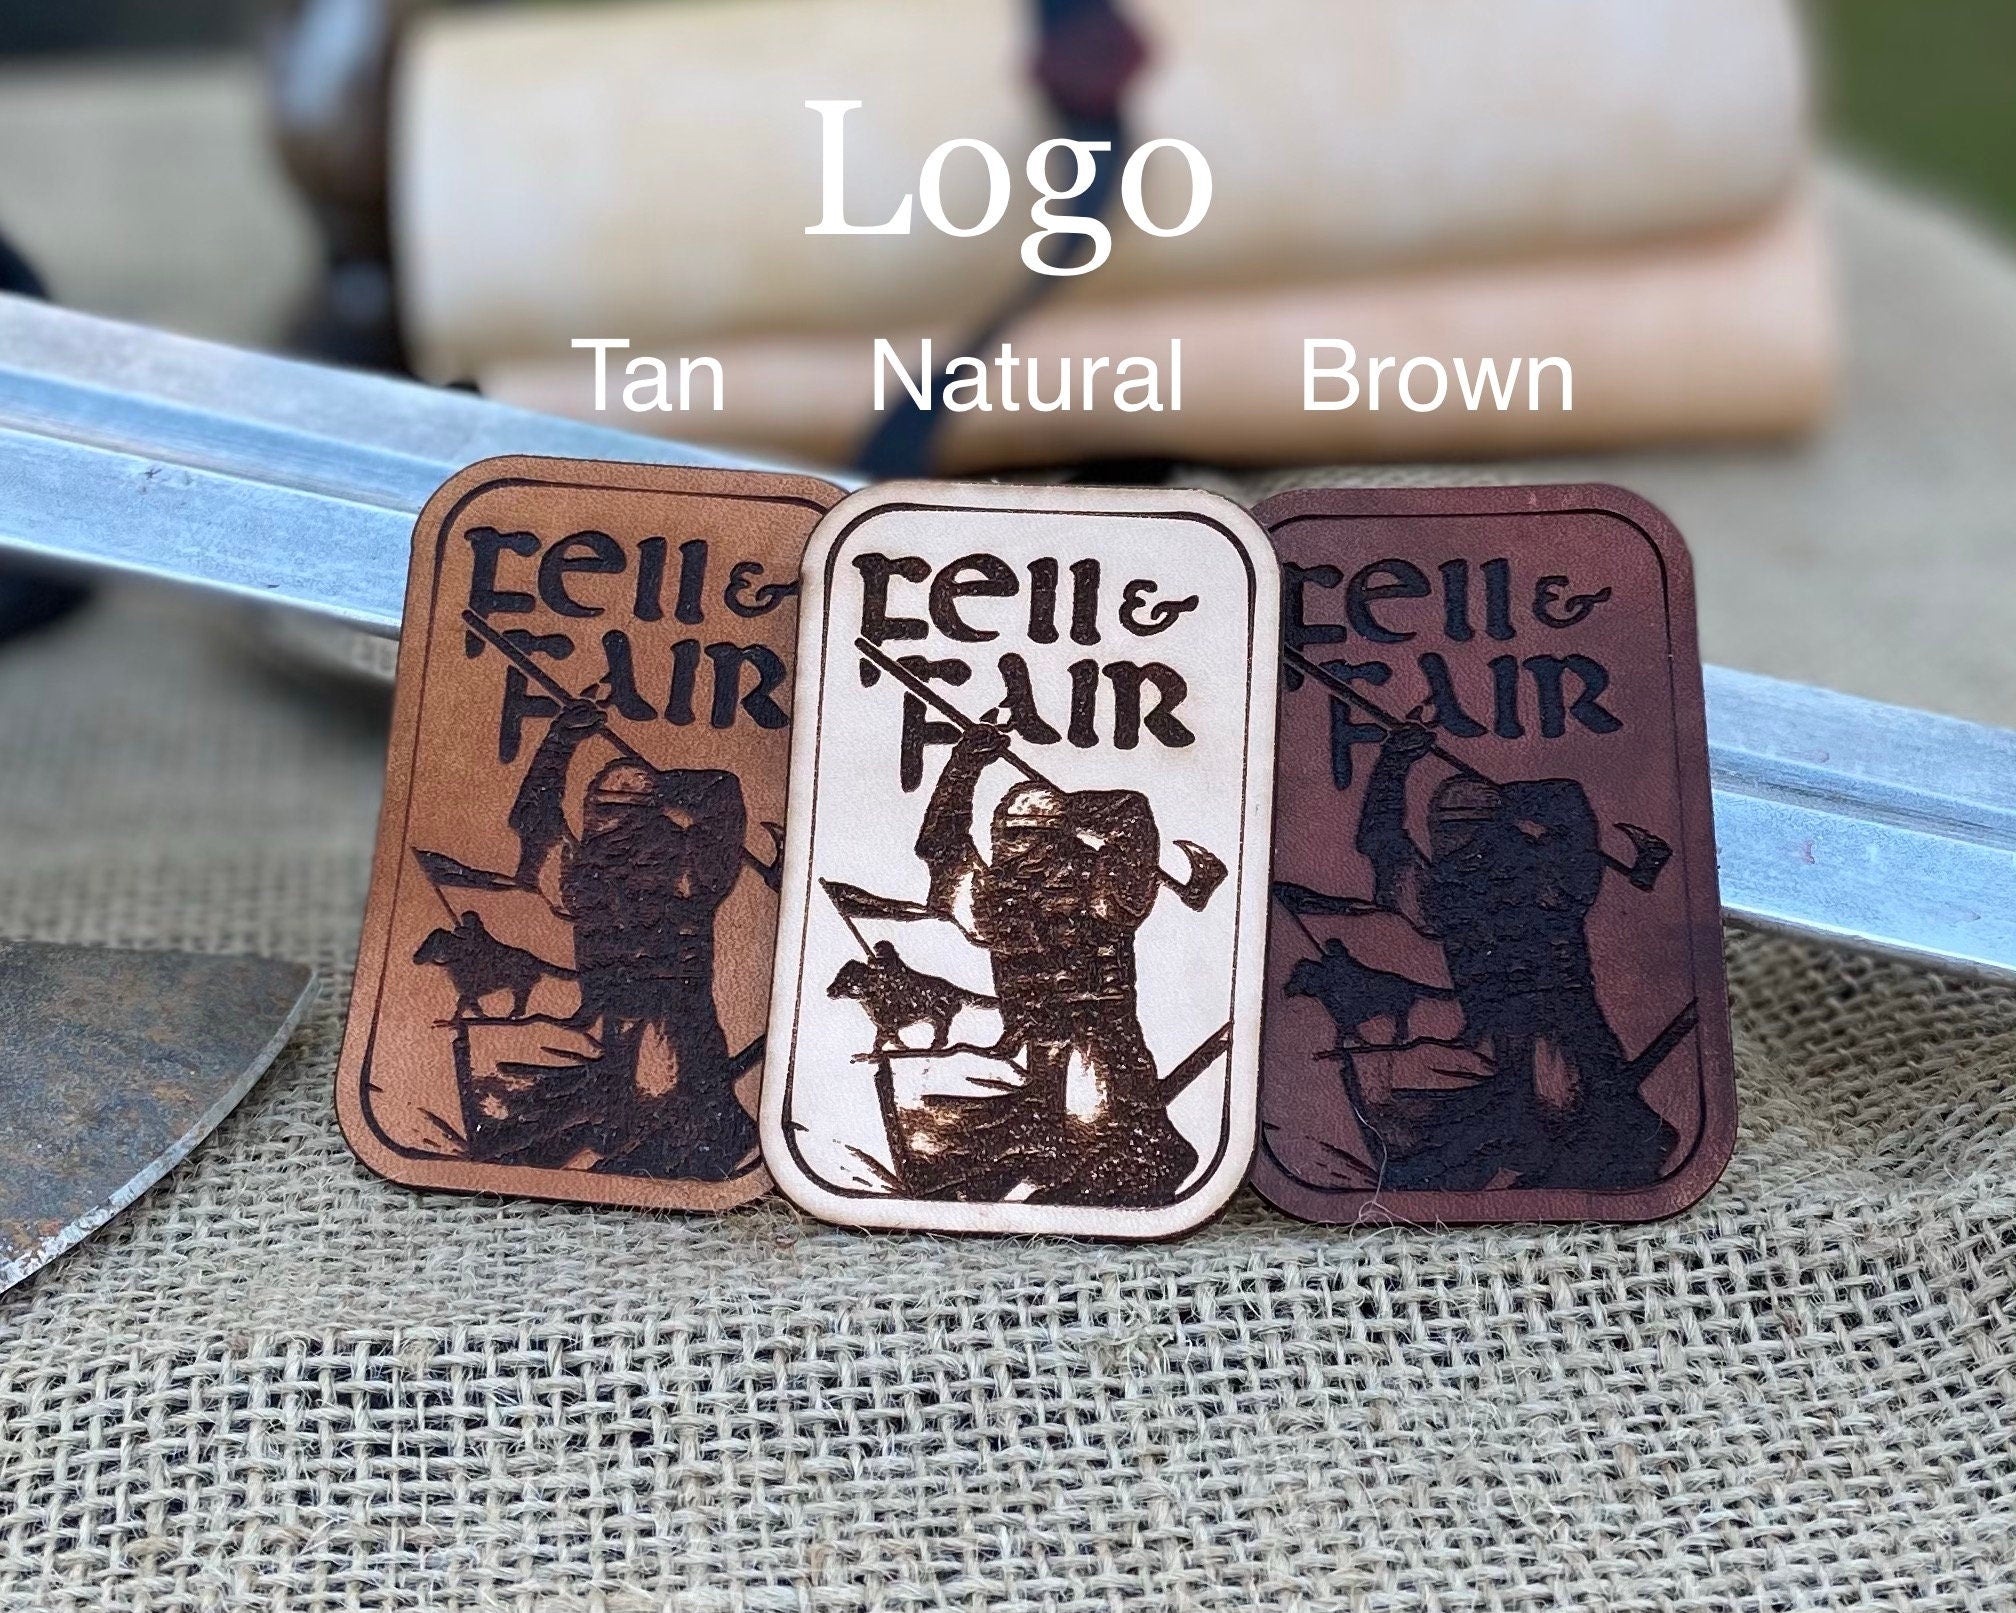 Fell & Fair Leather Patches